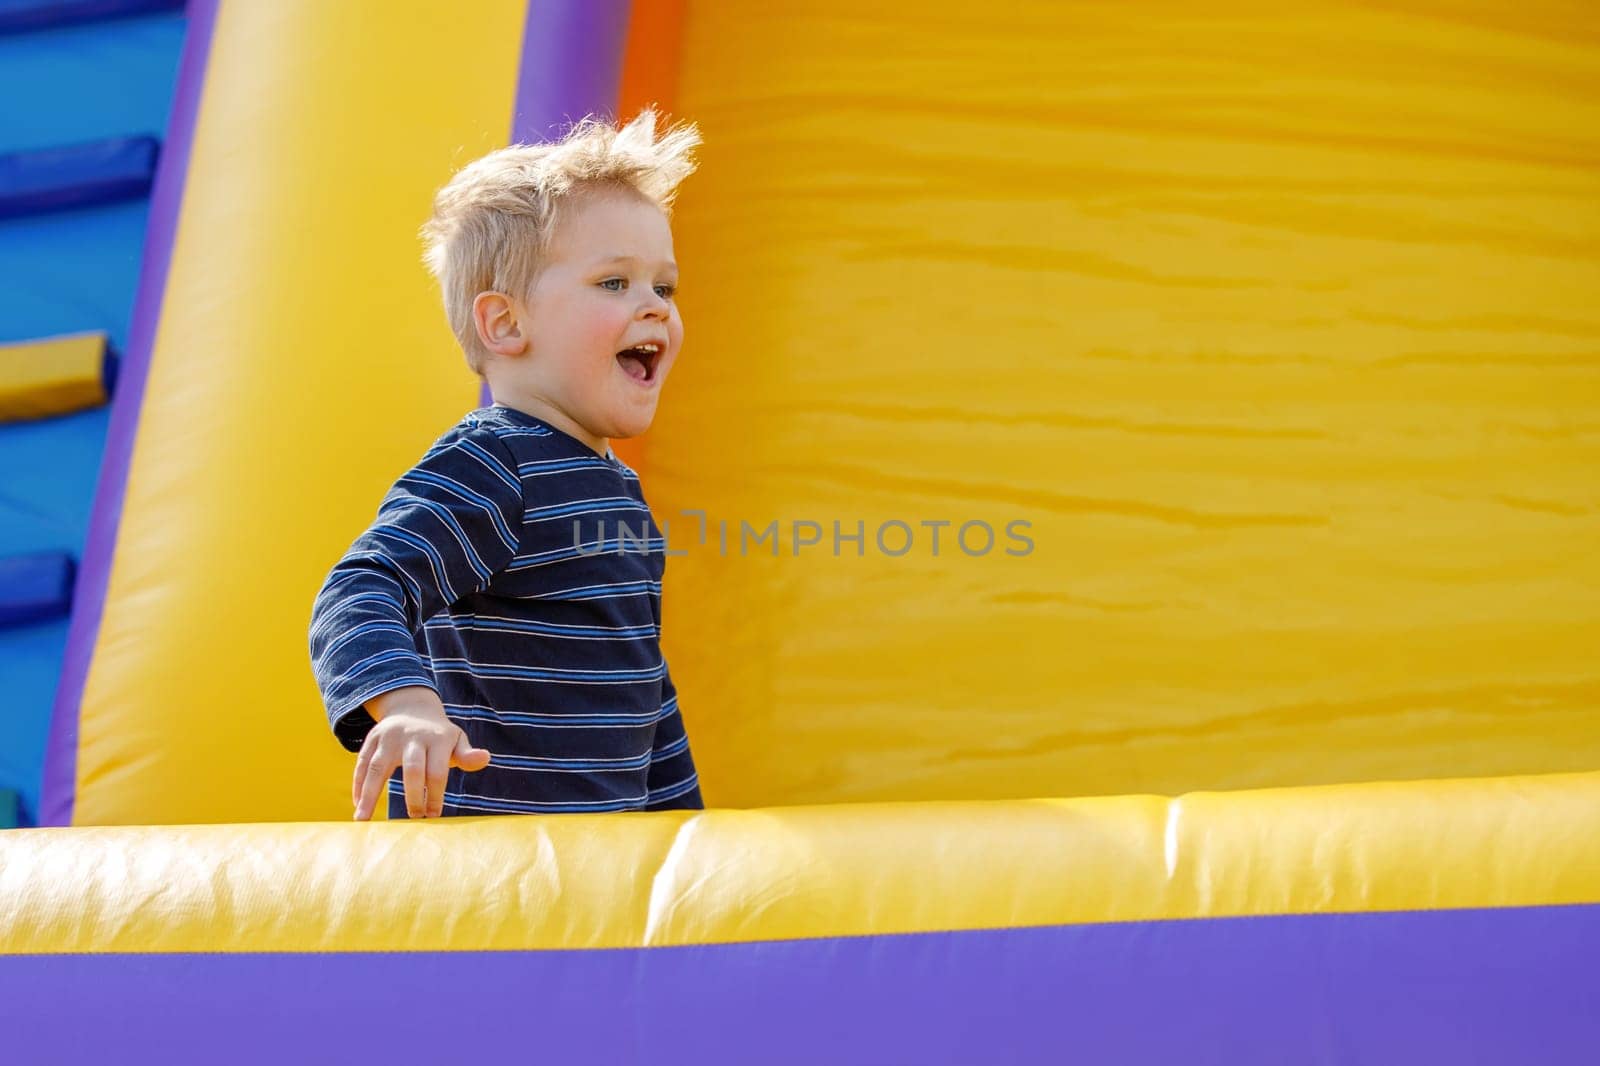 Little cool boy have fun and raging on an yellow inflatable trampoline. There is free space for text in the image by Lincikas